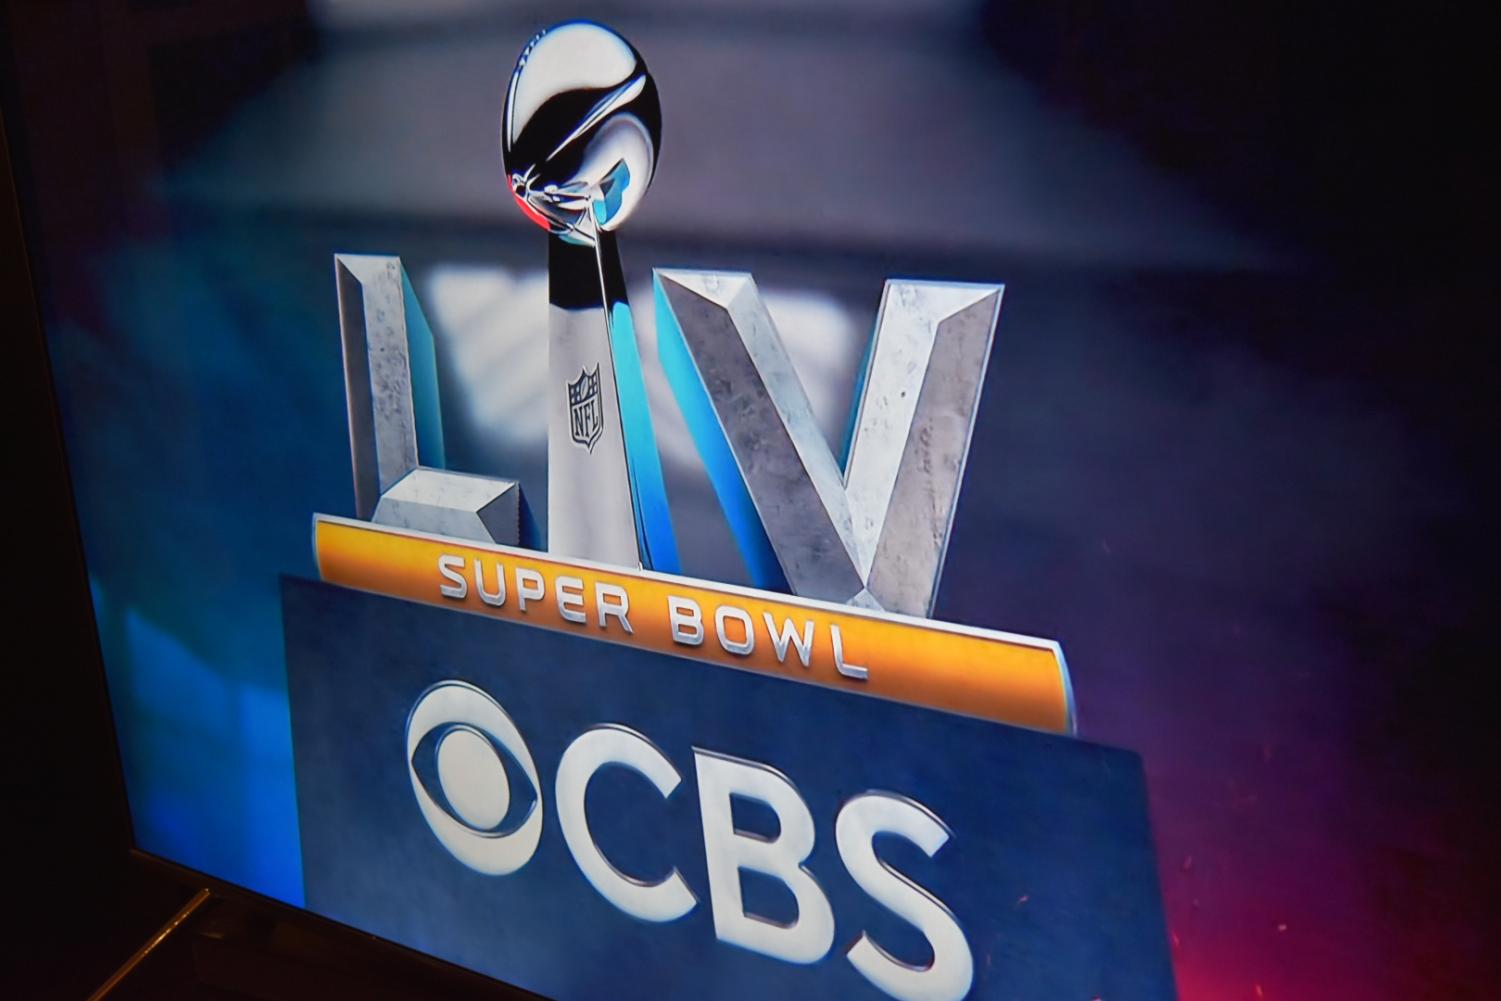 Super Bowl LV: A Disappointing End to a Historic Season